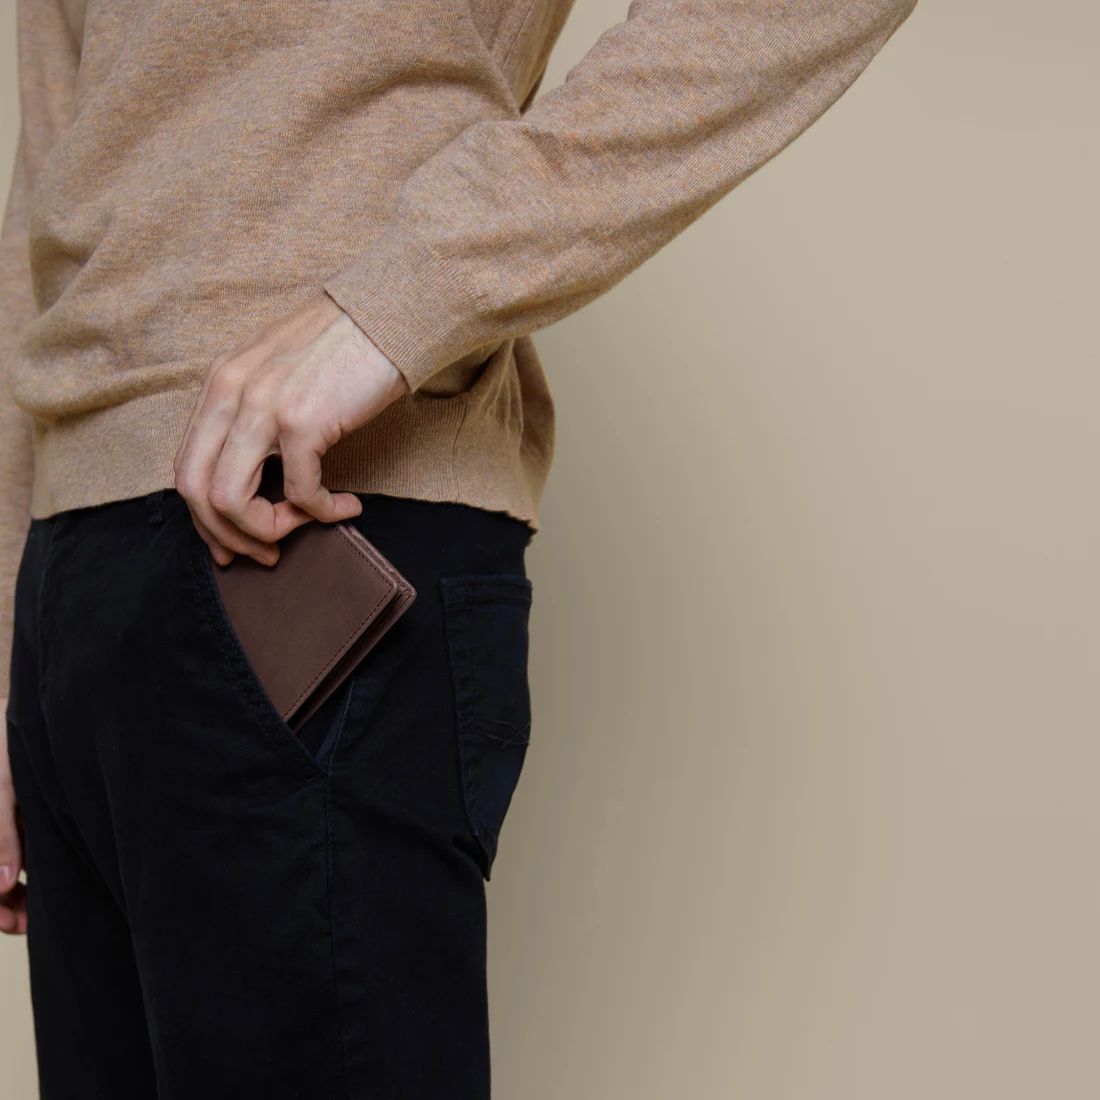 Bifold Wallet with Flap | Leatherology